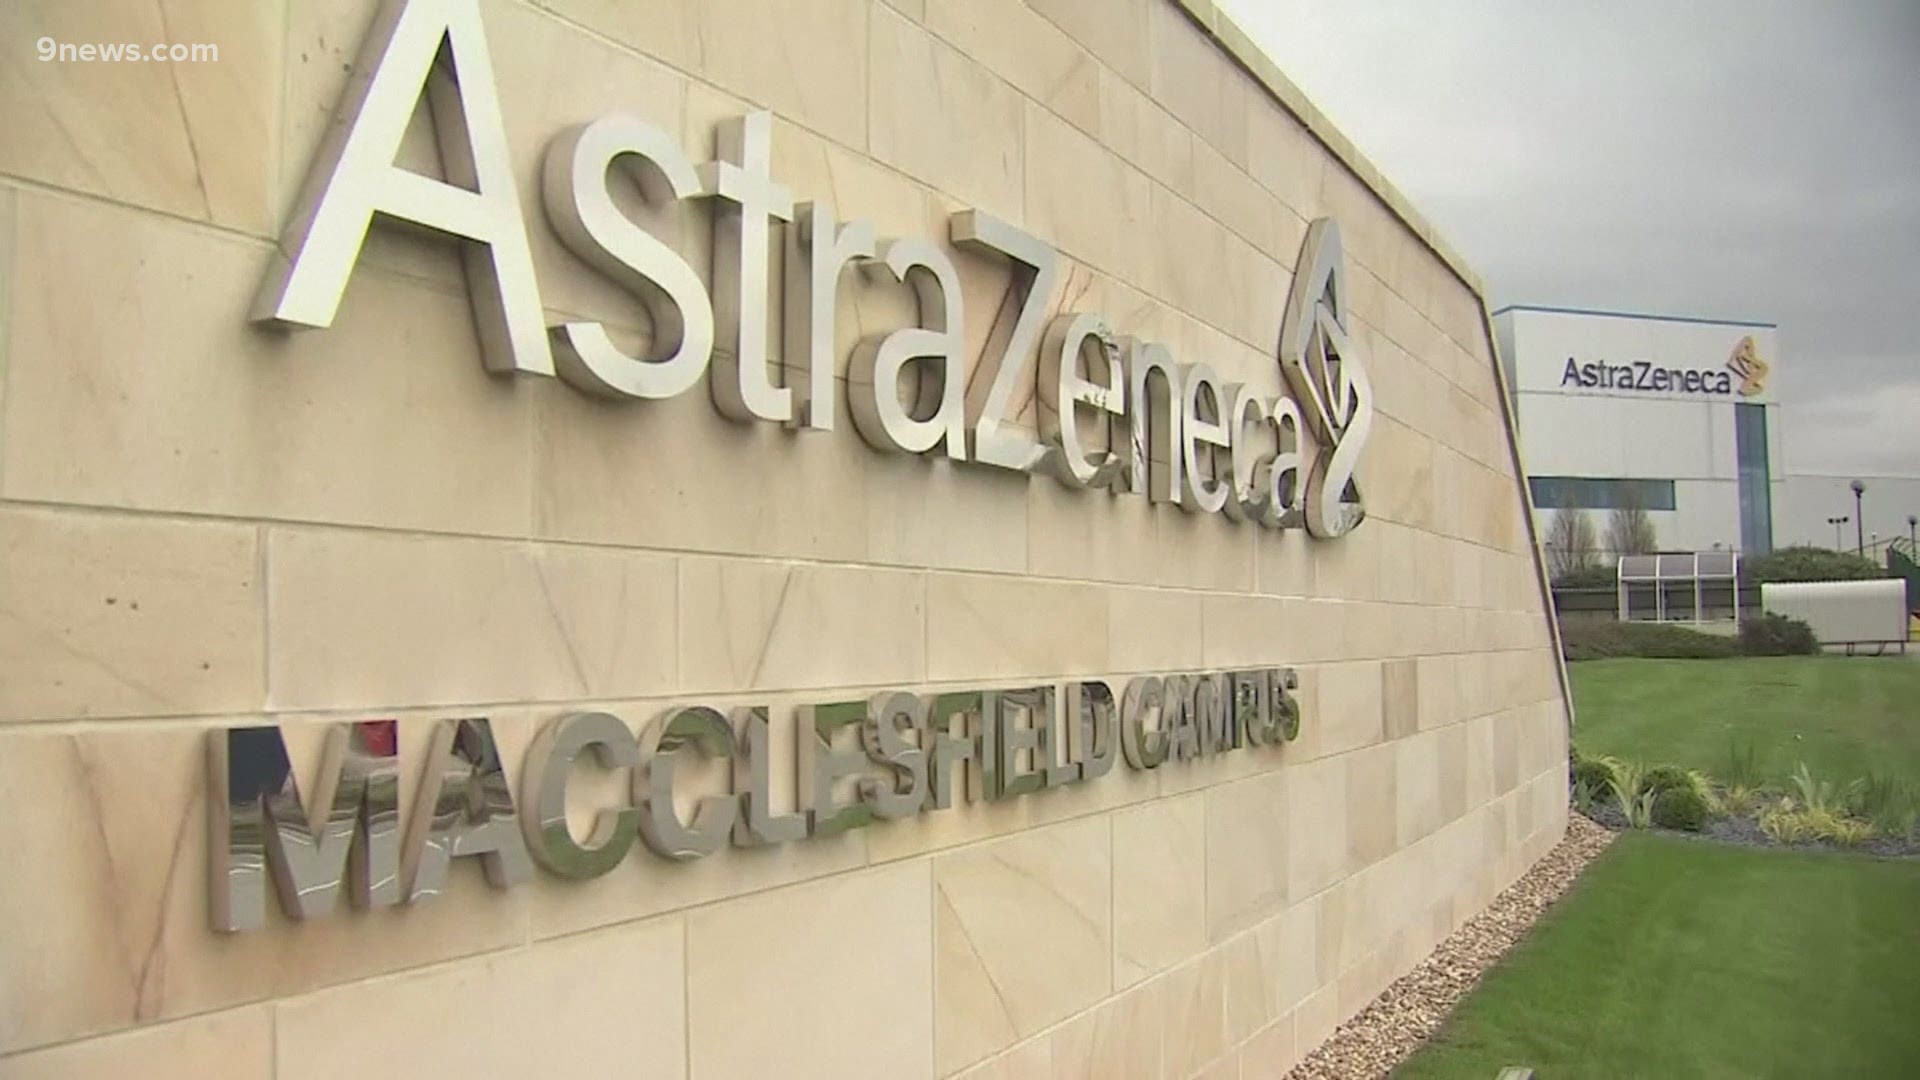 Astrazeneca one of the front runners in the hunt for a COVID-19 vaccine has put the development of a vaccine on hold because of an illness.